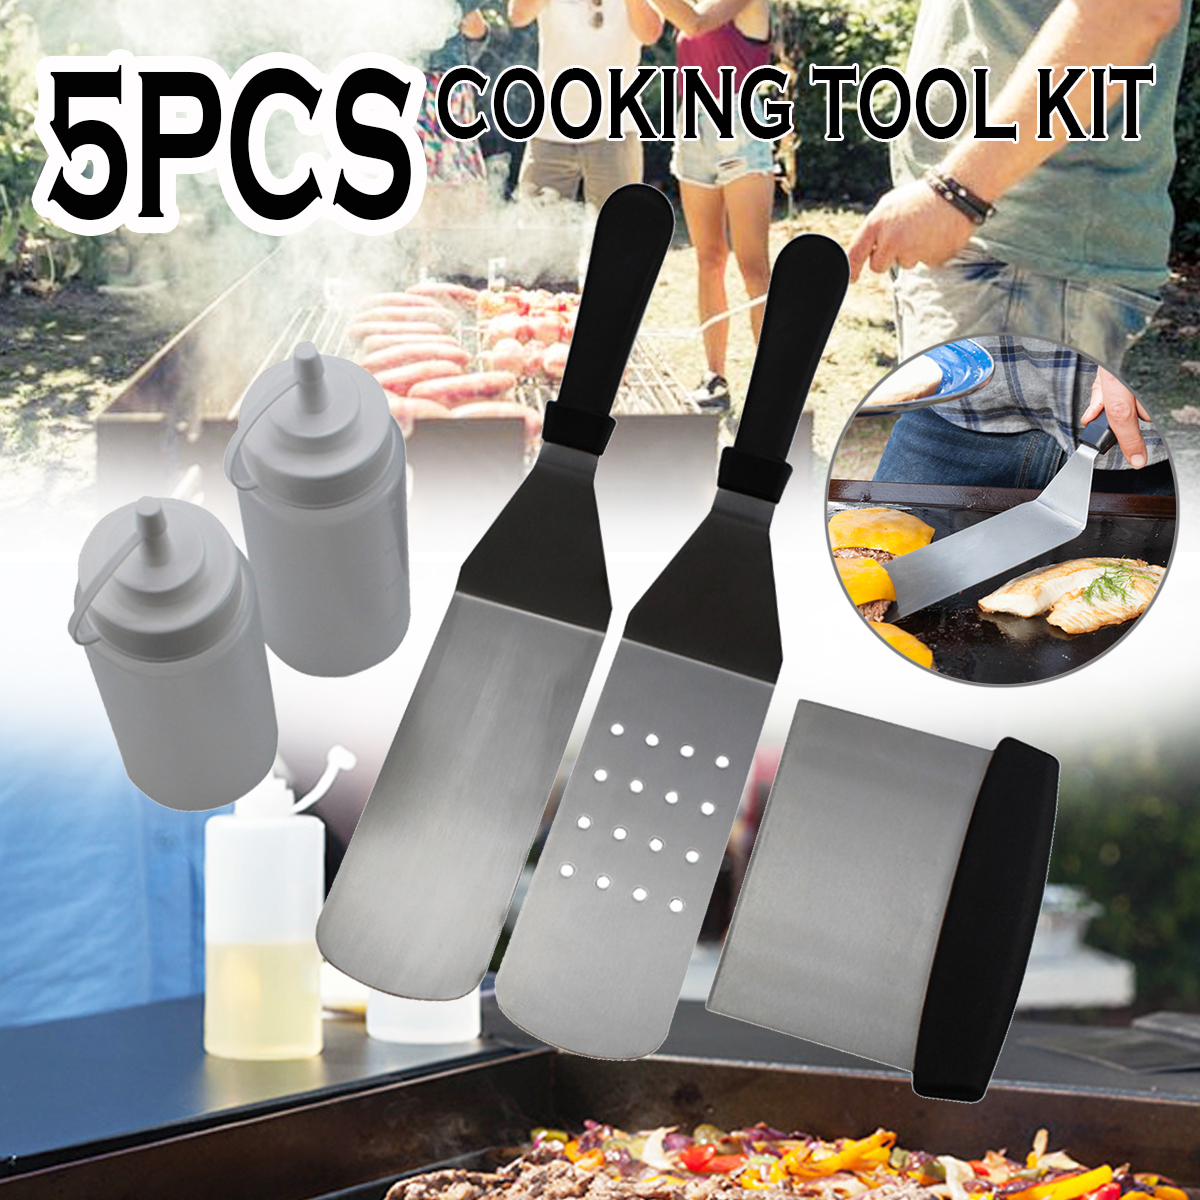 5Pcs-Stainless-Steel-Griddle-Cooking-Tools-Kit-for-Grill-Salad-Scraper-Chopper-Pizza-BBQ-Baking-Kitc-1623909-1